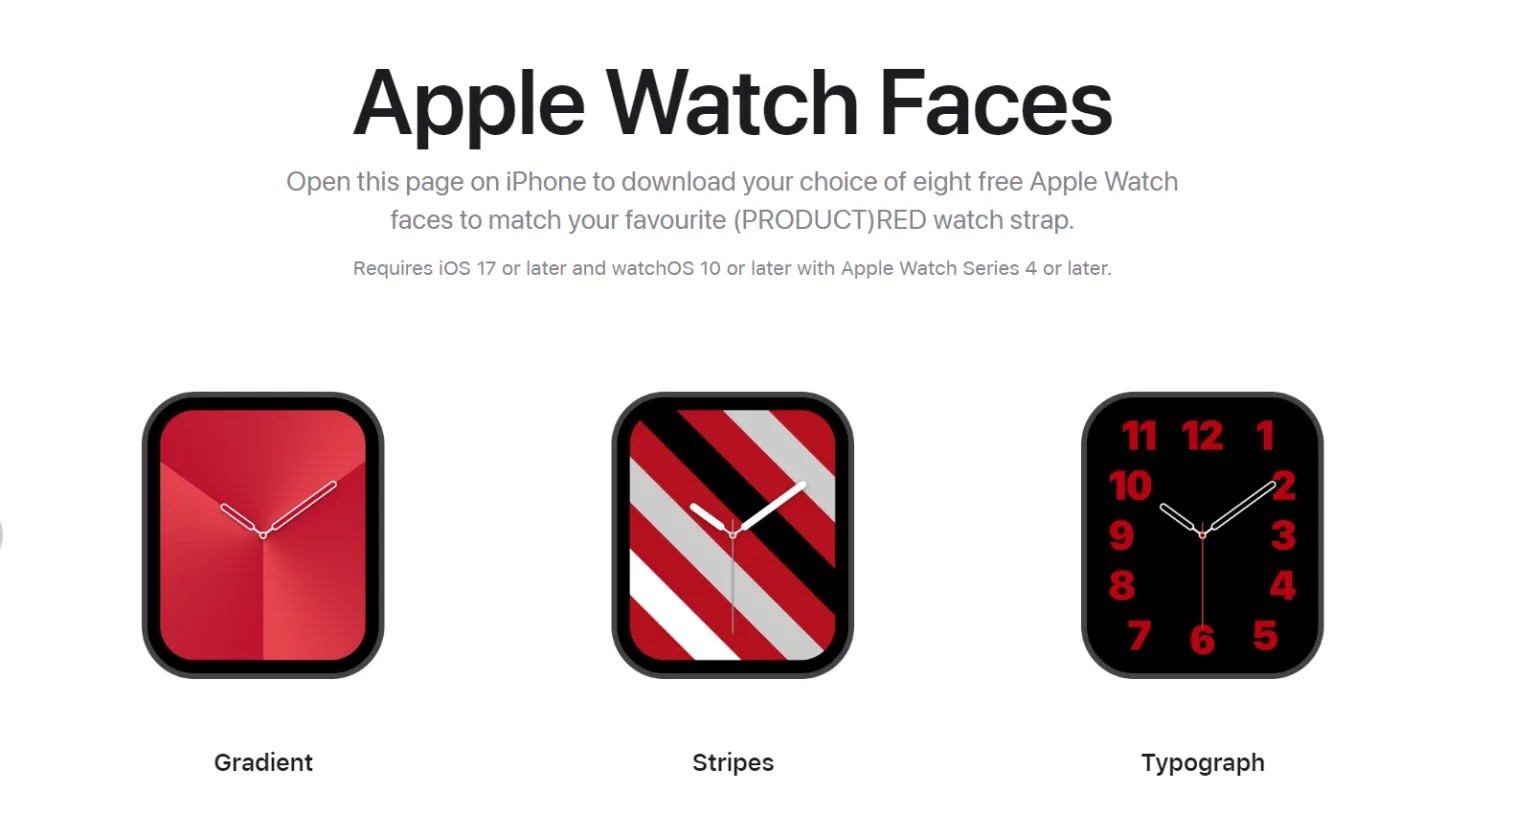 New Watch Faces for World AIDS Day